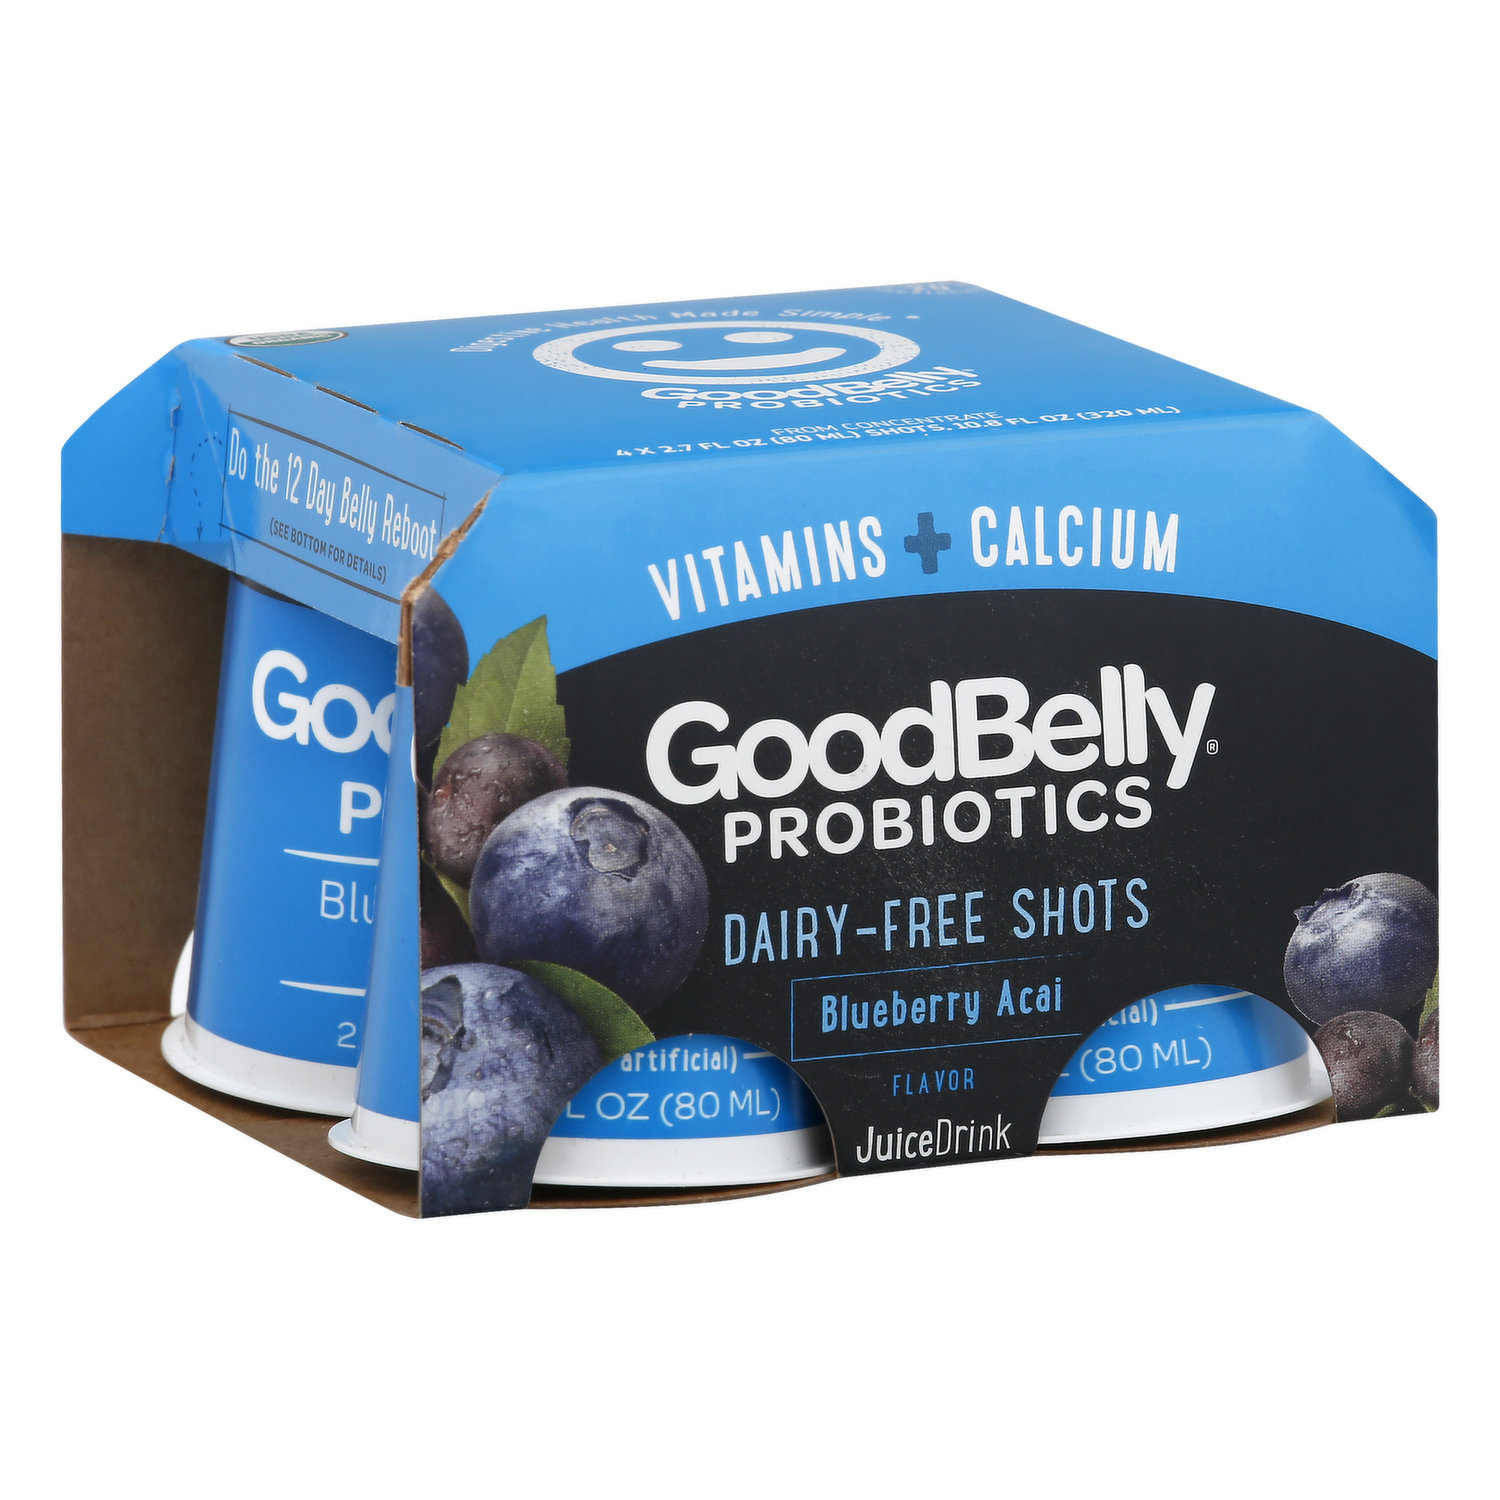 Buy GoodBelly Products at Whole Foods Market